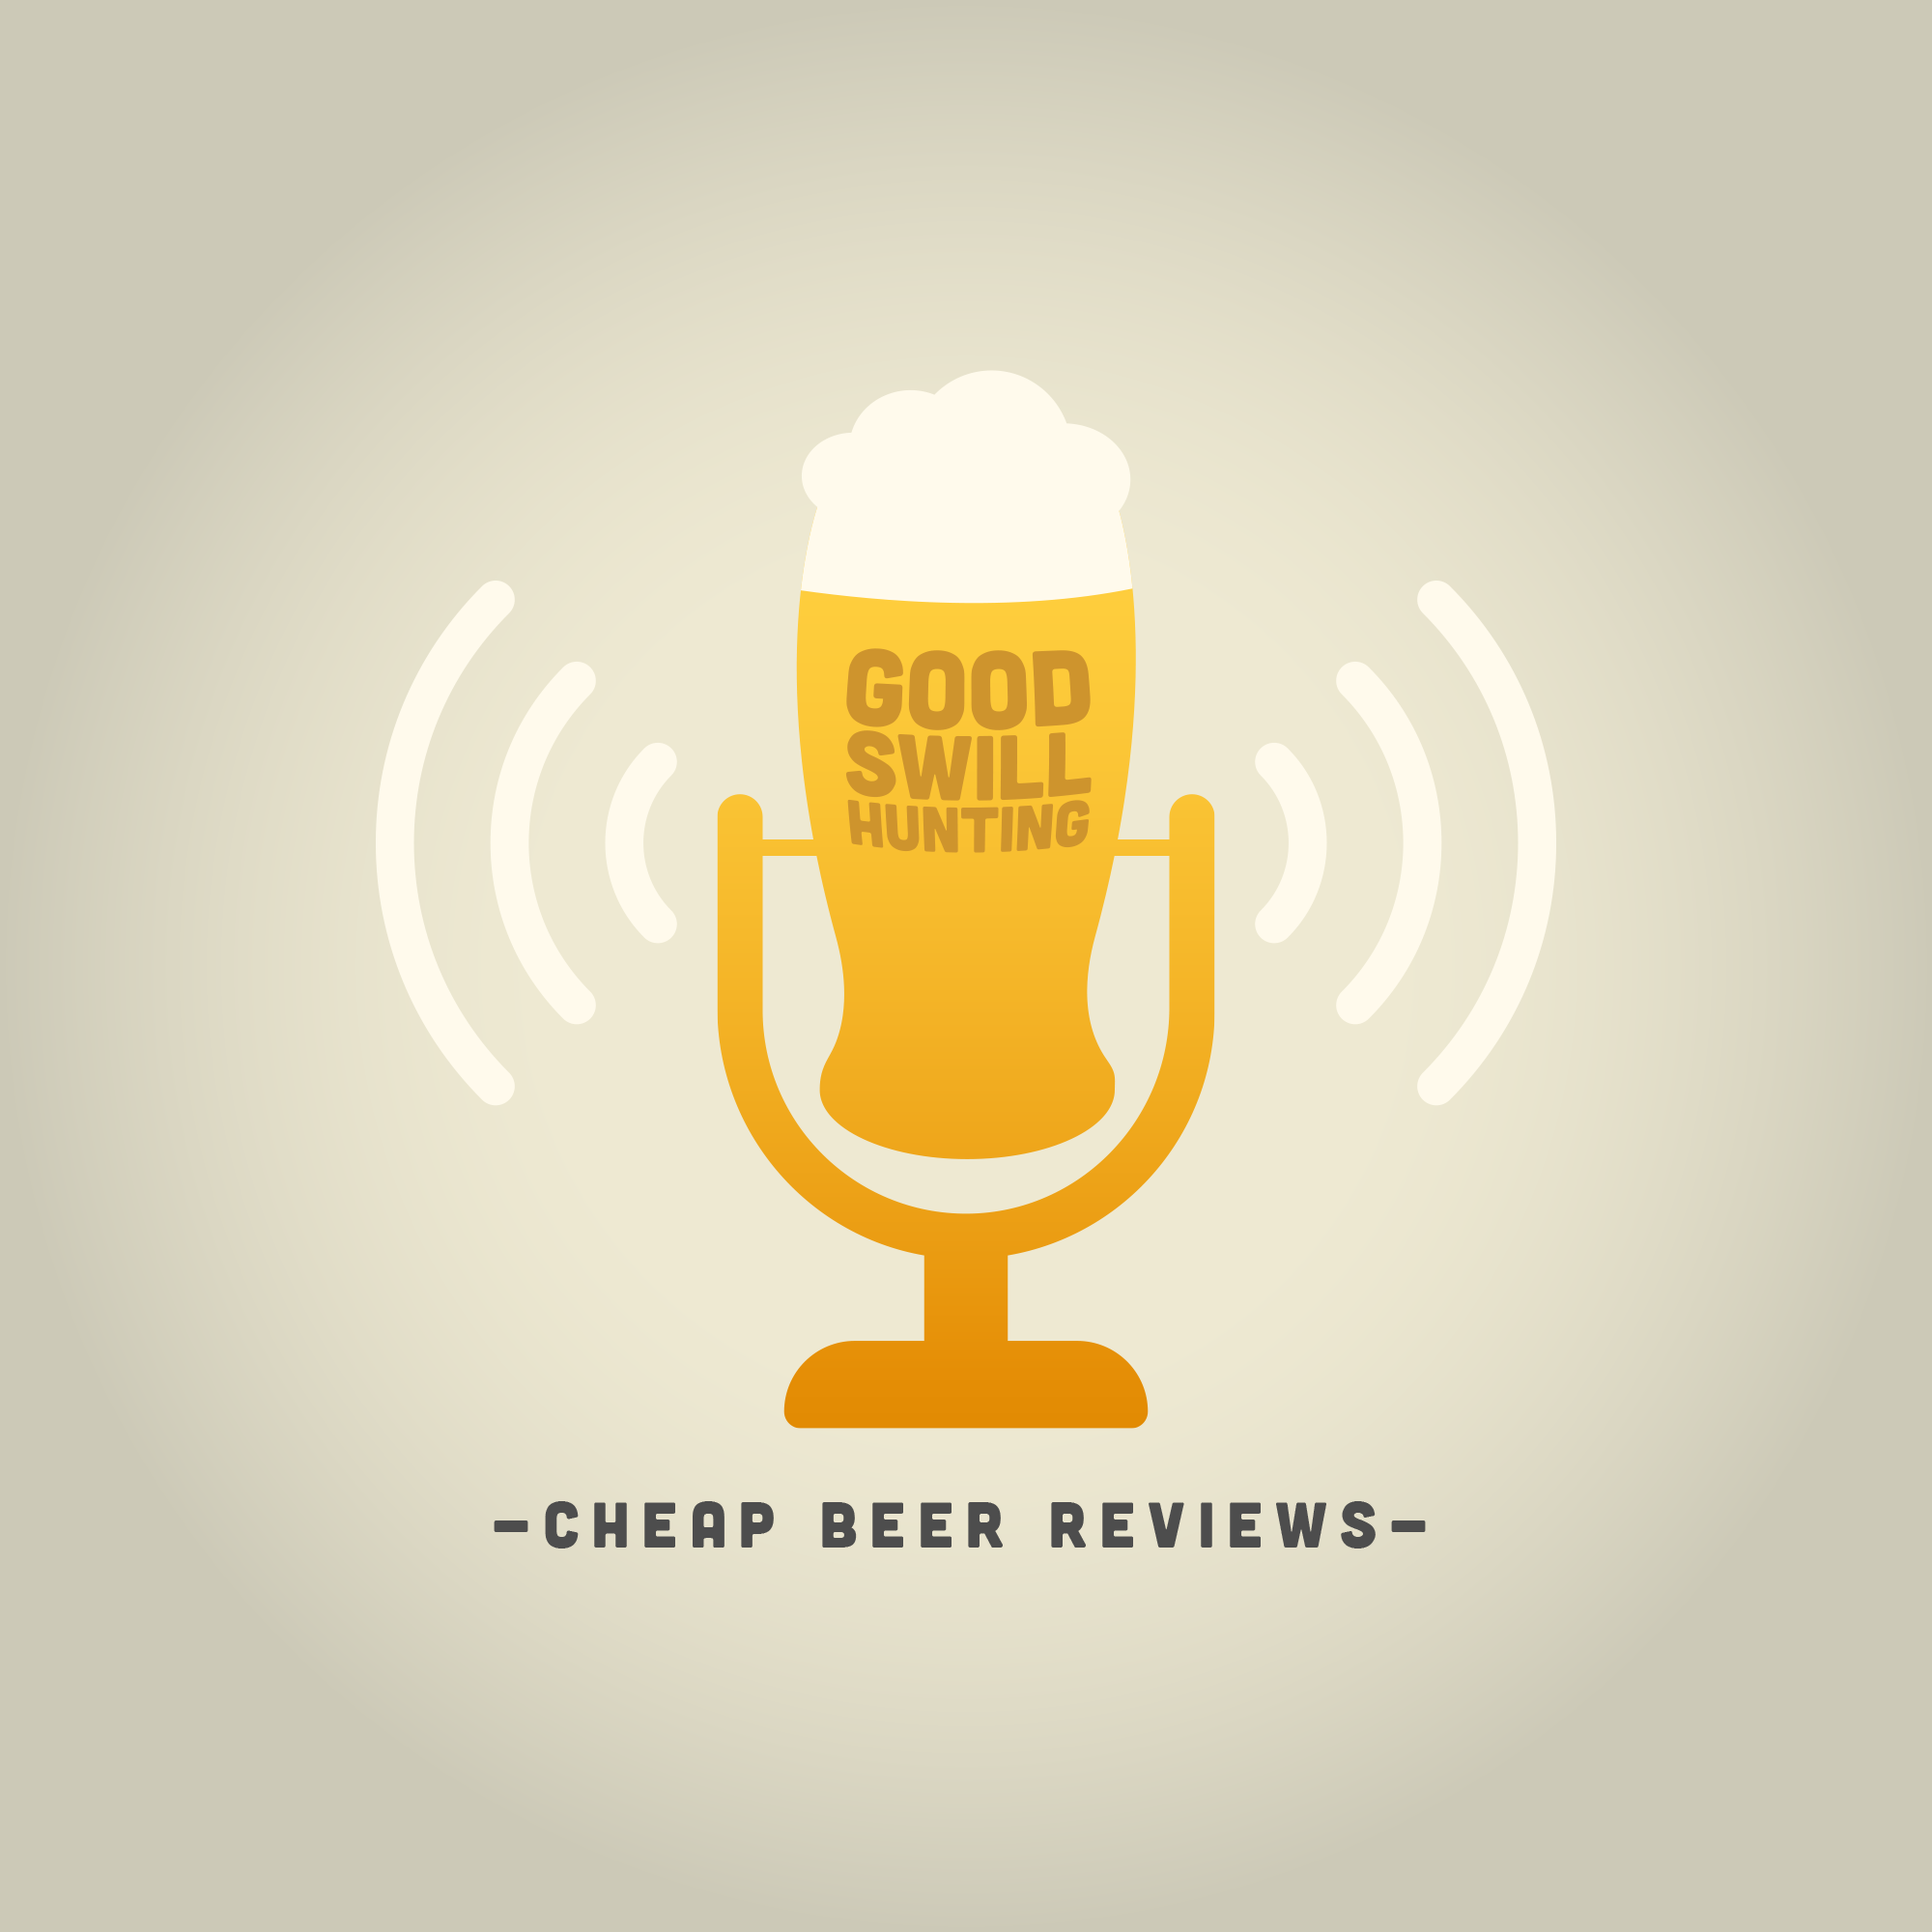 Good Swill Hunting - A Budget Beer Review Podcast